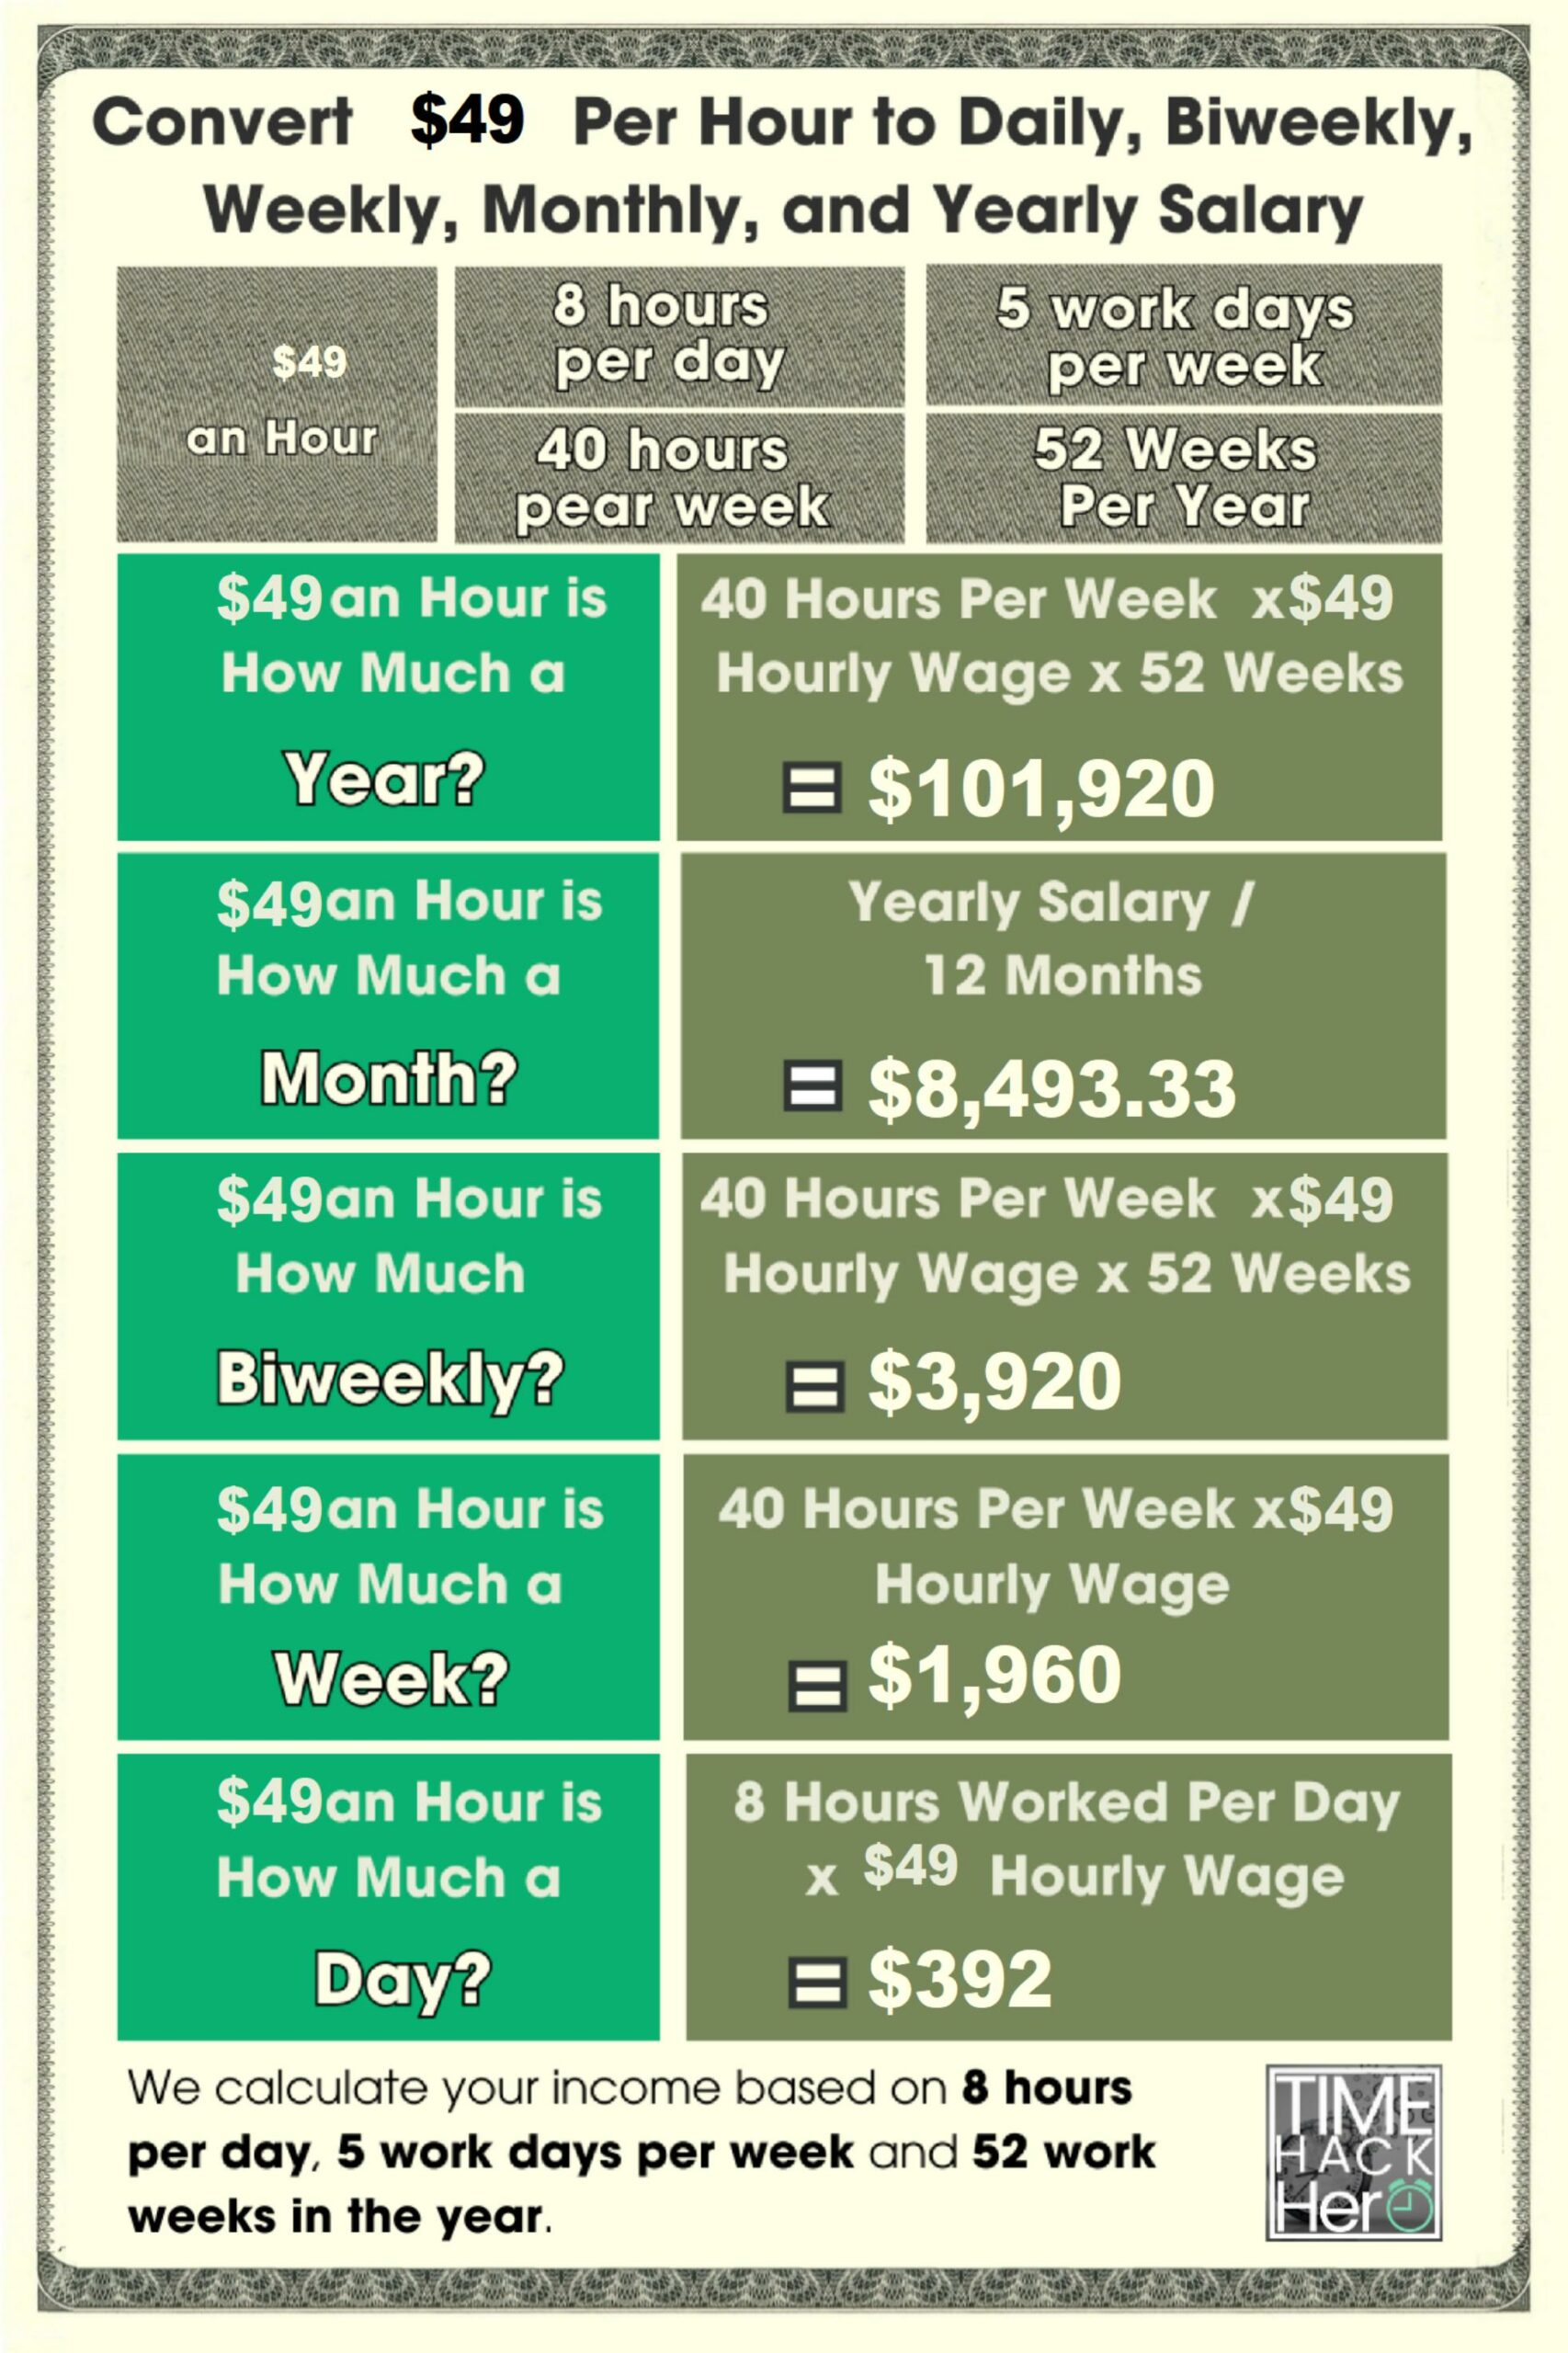 Convert $49 Per Hour to Weekly, Monthly, and Yearly Salary